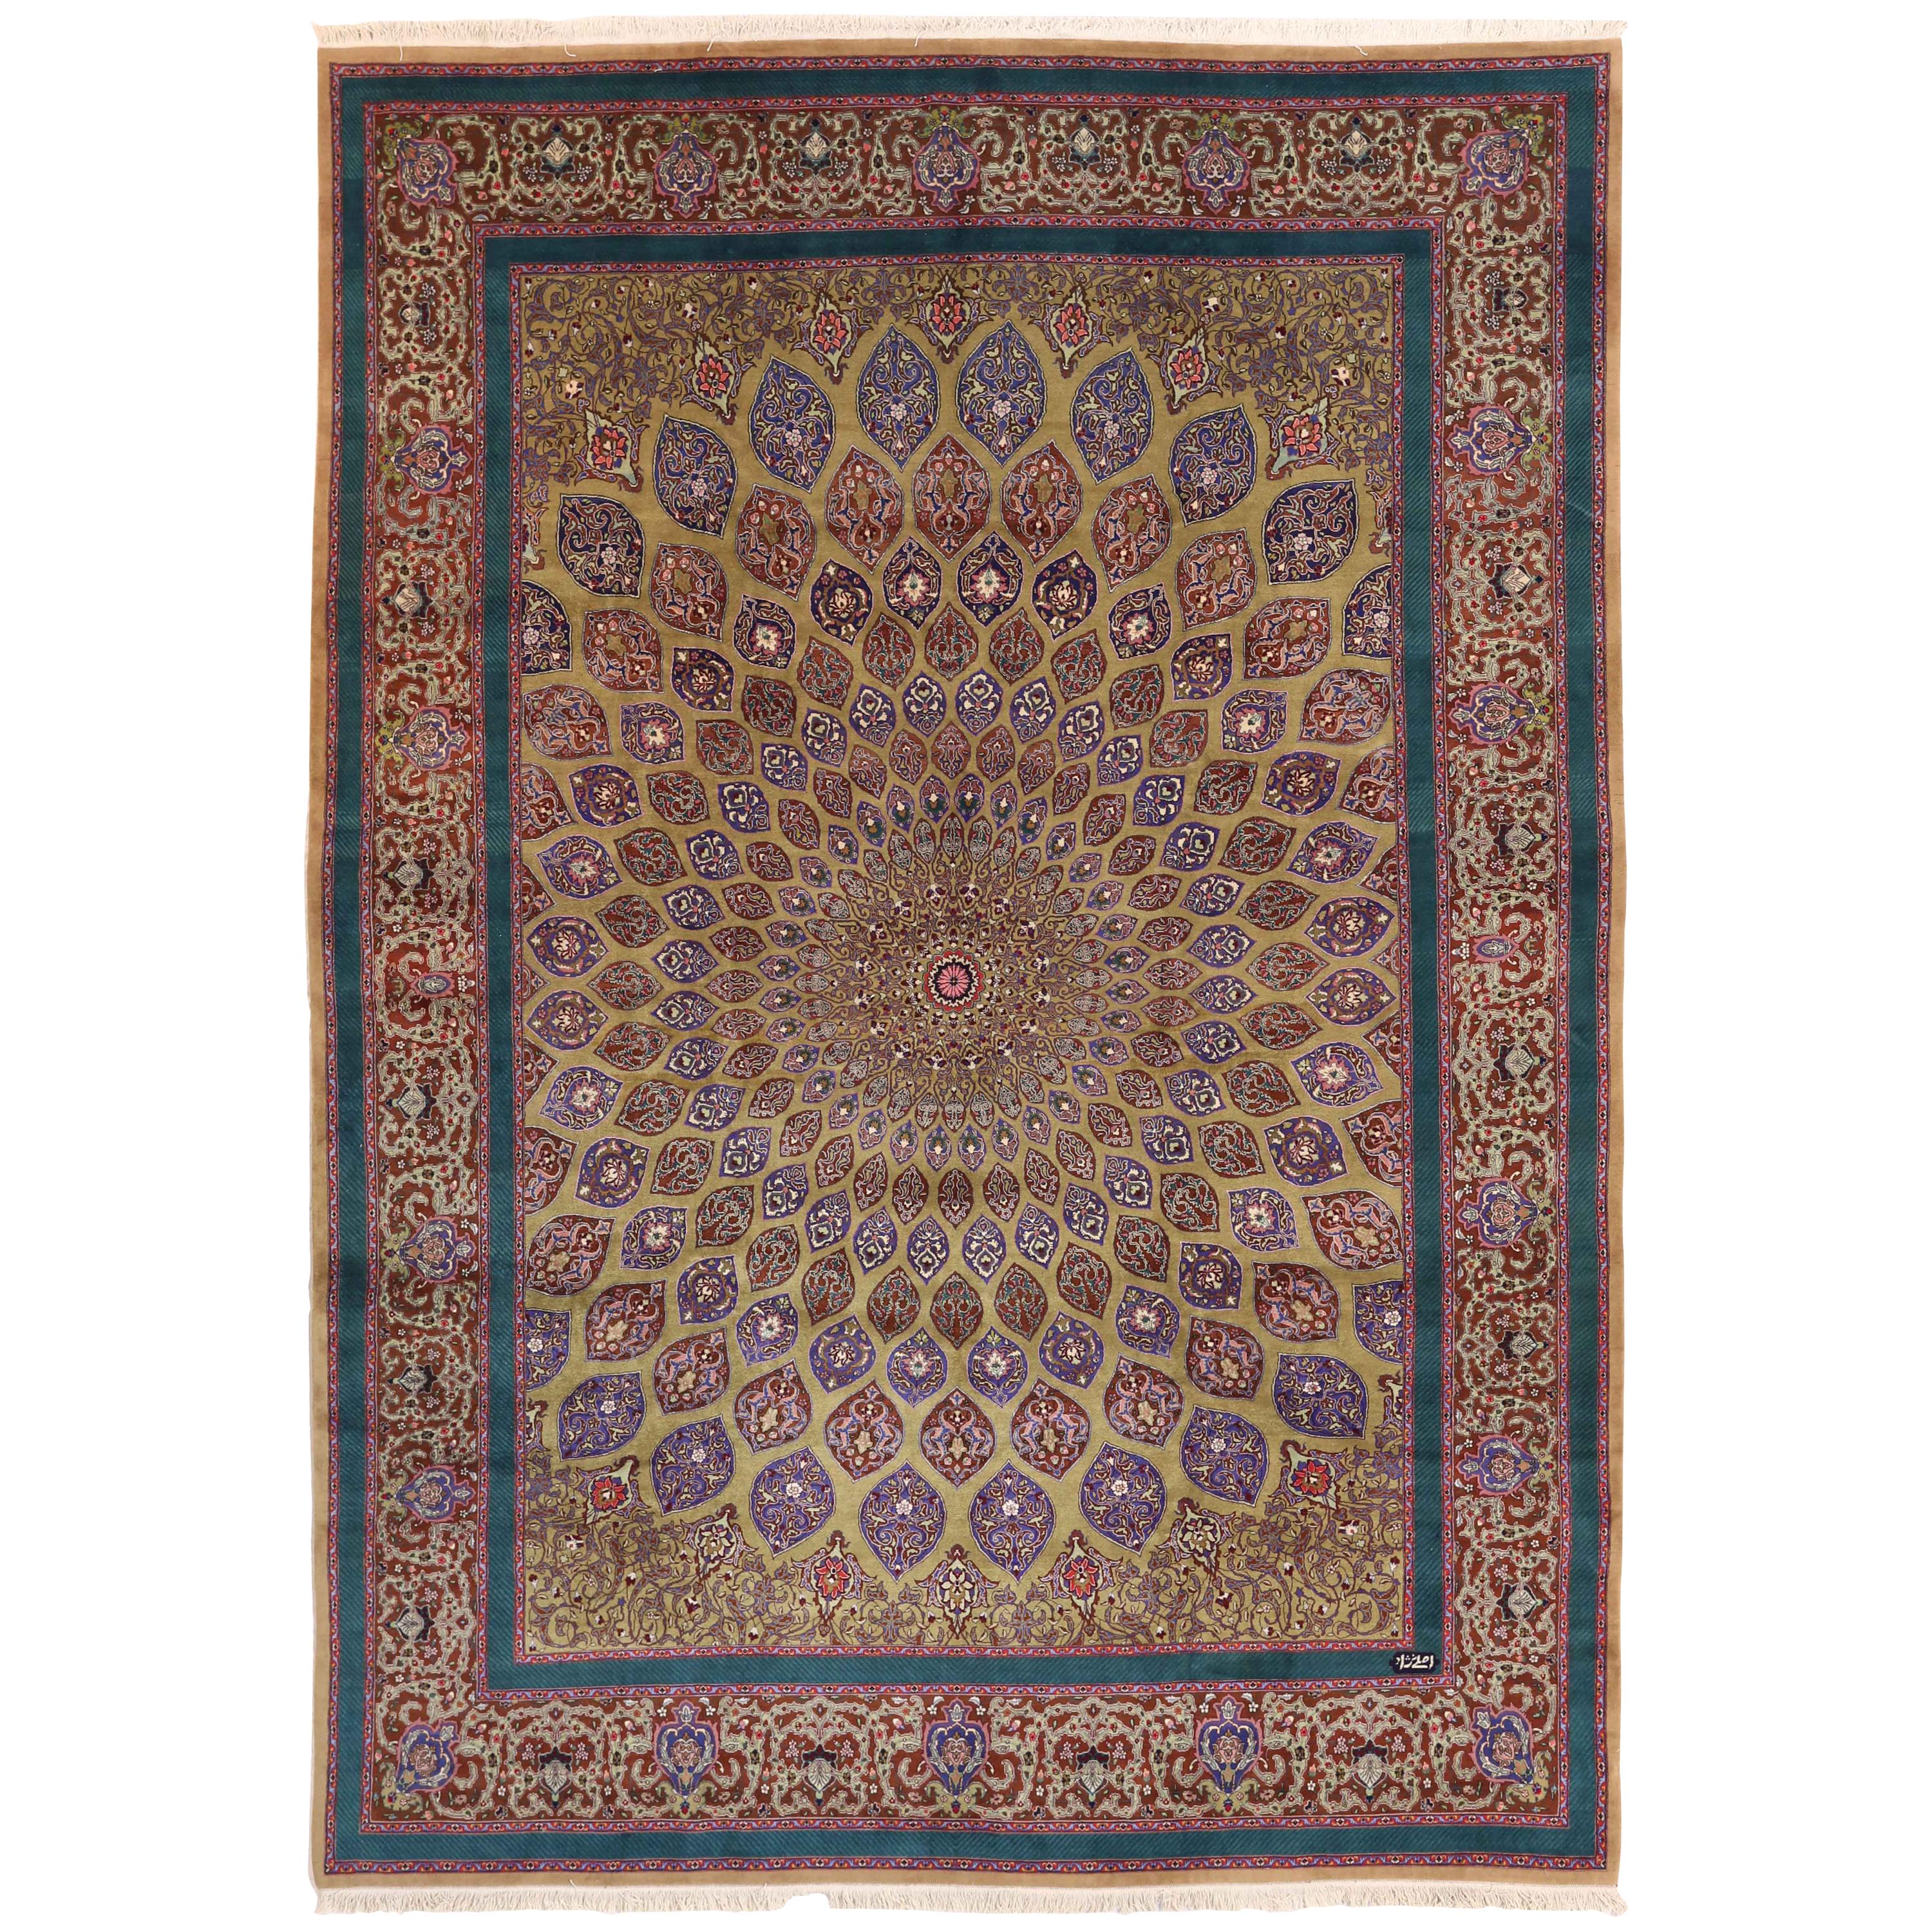 1970s Antique Tabriz Persian Rug with Circular Floral Motif in Green and Red For Sale